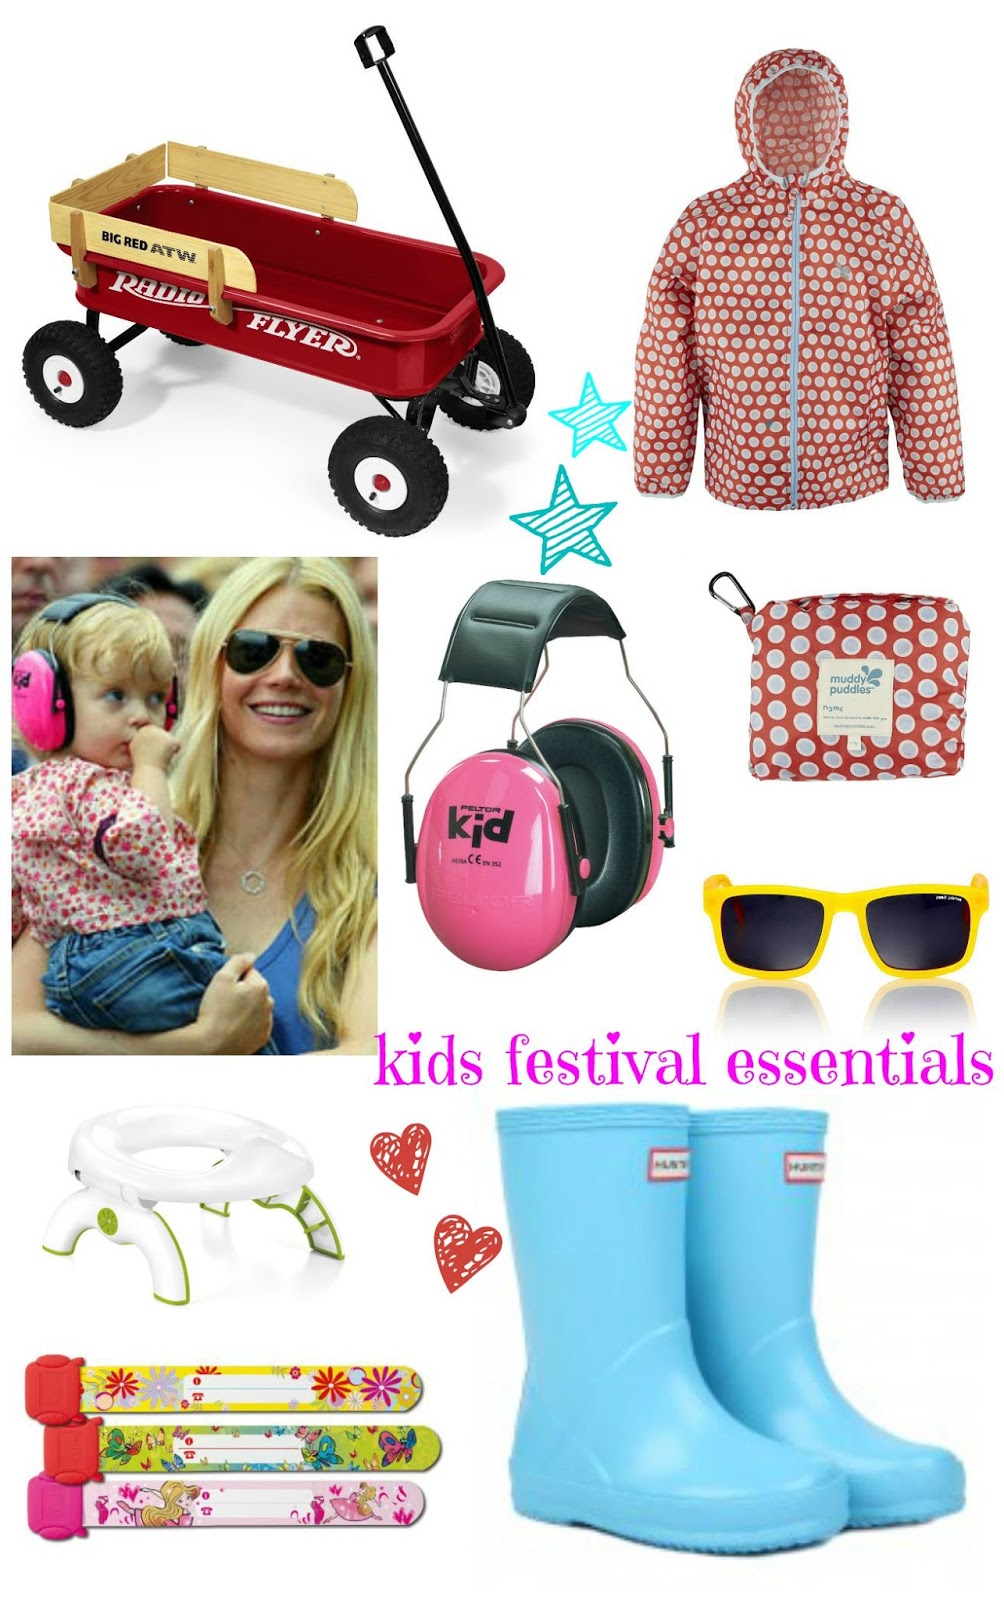 mamasVIB | V. I. BASH: Heading to Camp Bestival for the first time - & some toddler essentials we're packing! | camp bestival | camping | festival | vogue 2005 | glastonbury | festivals for families | family festivals | festival buys | toddlers at festivals | toddlers | camping holiday | camping buys | kids at festivals | camp bestival wild | tickets to camp bestival | now magazine| wagons for kids | festival essentials